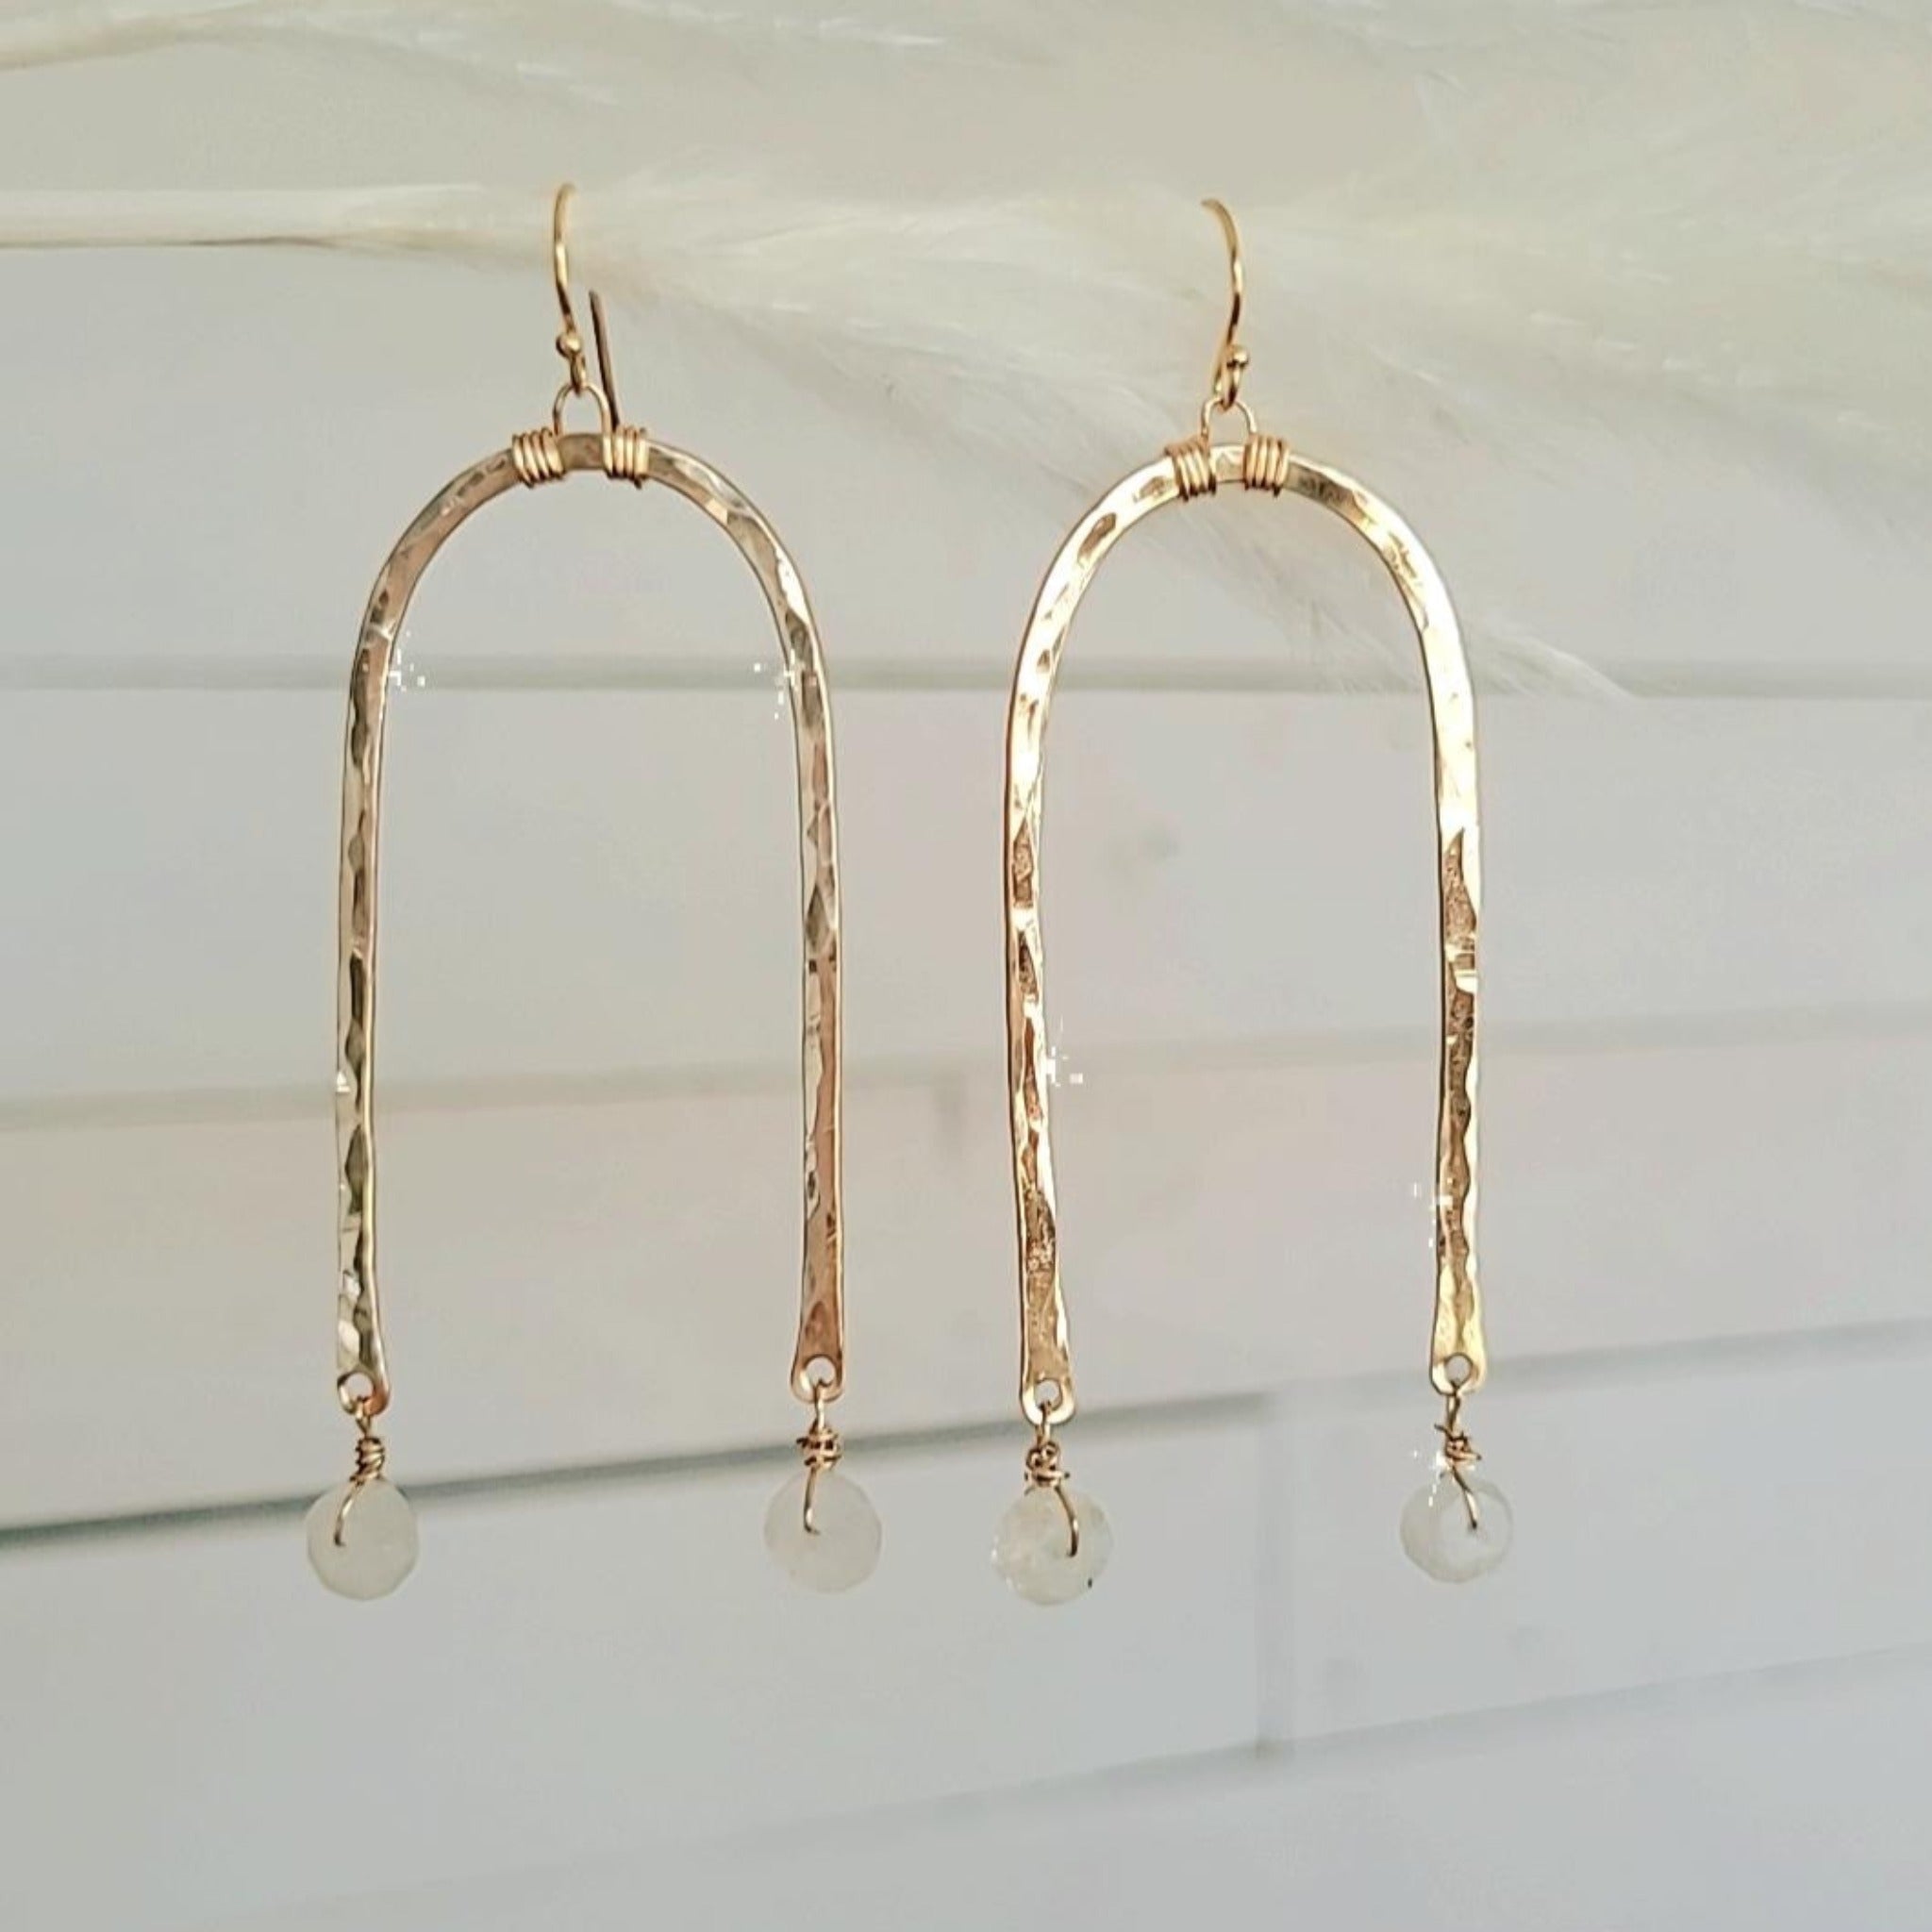 Rainbow and Stone Dangle Earrings - Large or Small - Sterling, Gold or Rose Gold